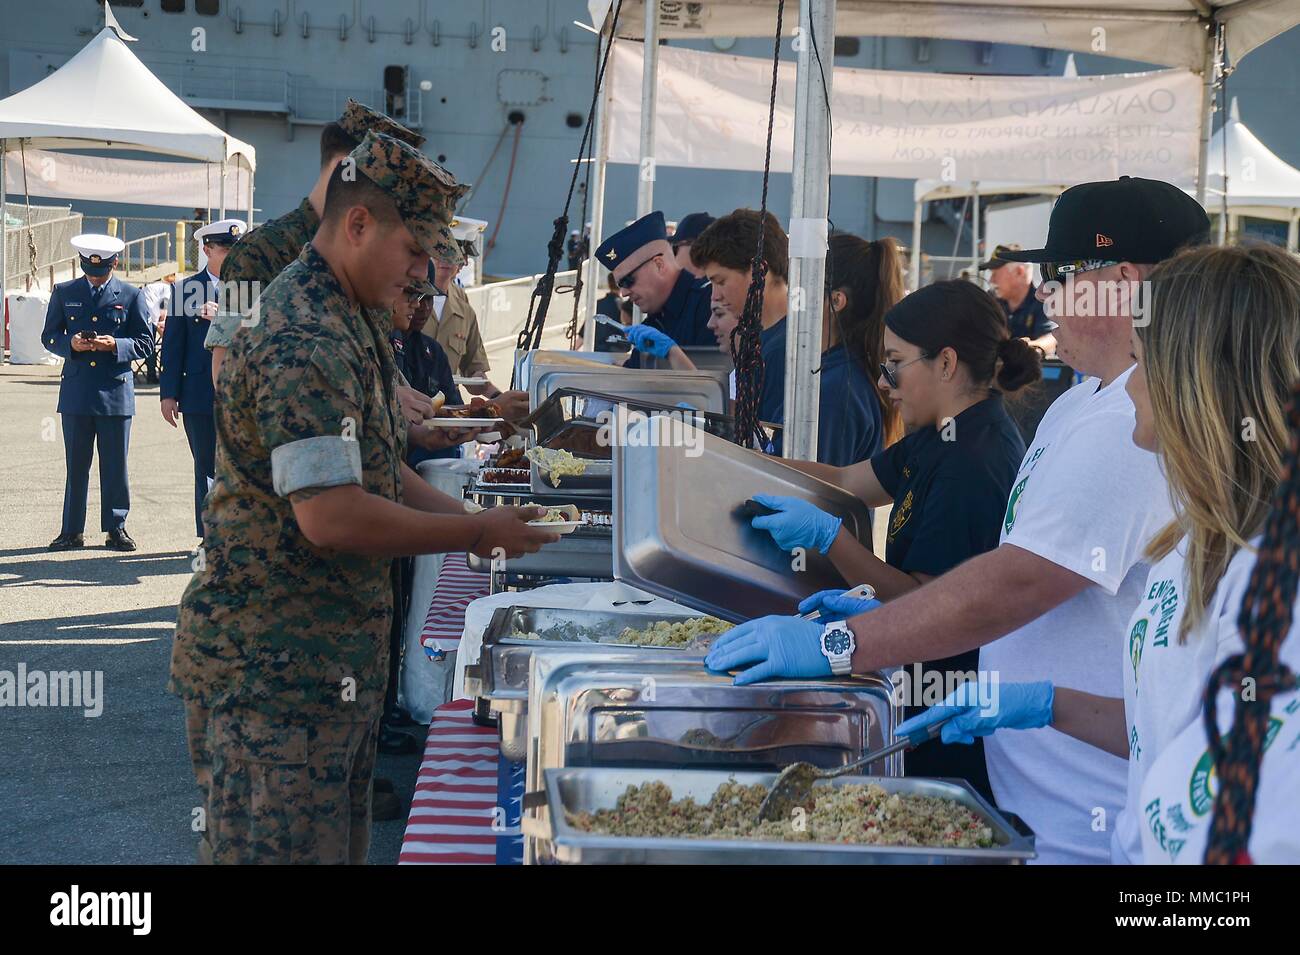 SAN FRANCISCO (Oct. 8, 2017) Volunteers from Oakland Navy League, Oakland Police Department and local civic organizations serve lunch to Sailors, Marines and Coast Guard members during Fleet Week San Francisco 2017. Fleet week provides an opportunity for the American public to meet their Navy, Marine Corps, and Coast Guard team and to experience America’s sea services. Fleet Week San Francisco will highlight naval personnel, equipment, technology, and capabilities, with an emphasis on humanitarian assistance and disaster response. (U.S. Navy photo by Mass Communication Specialist 1st Class Ant Stock Photo